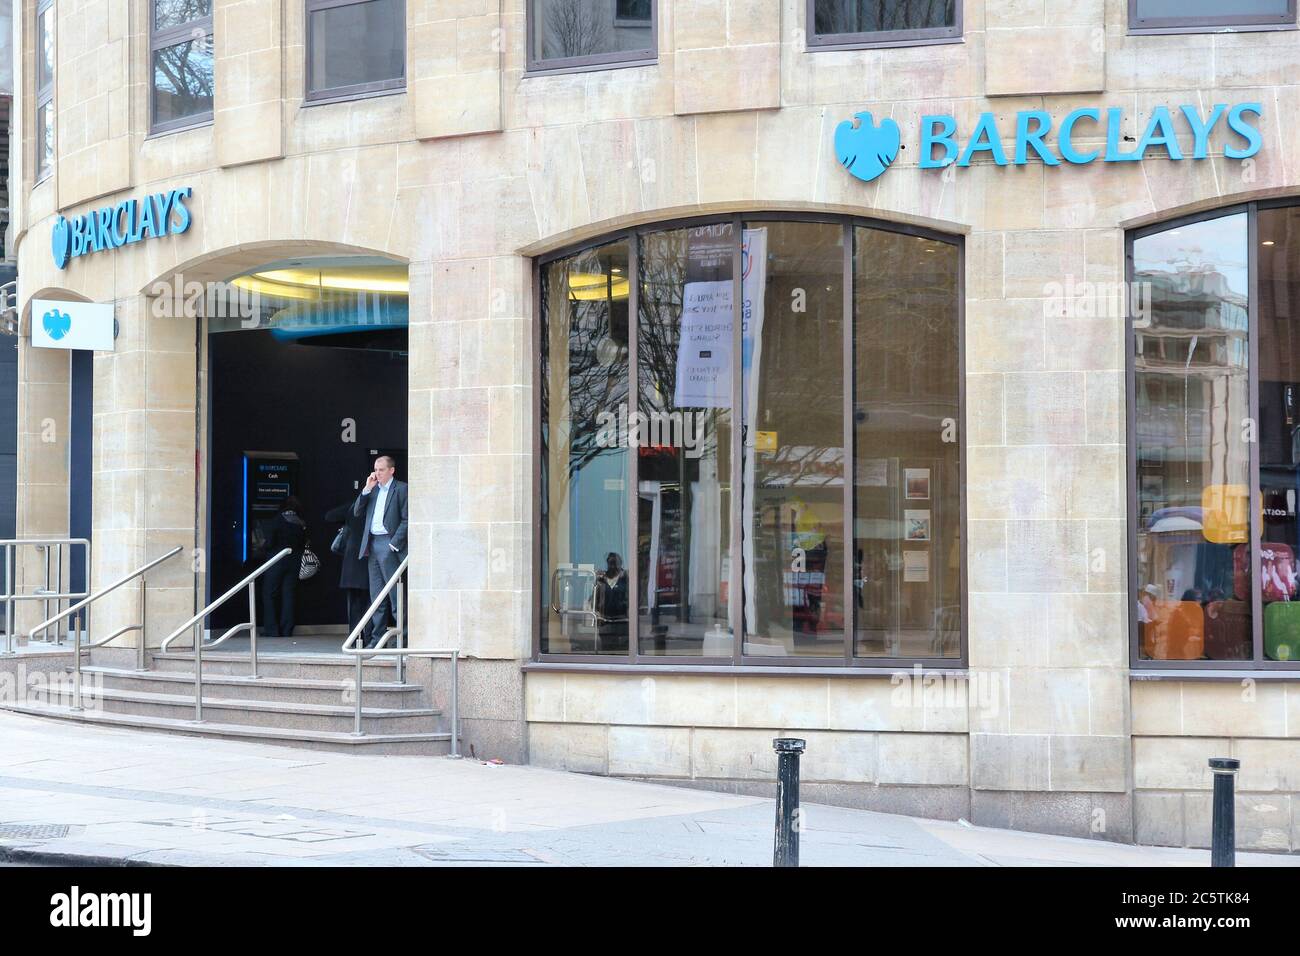 BIRMINGHAM, UK - APRIL 19, 2013: People visit Barclays Bank in Birmingham, UK. Barclays is a multinational finance and banking group based in London, Stock Photo